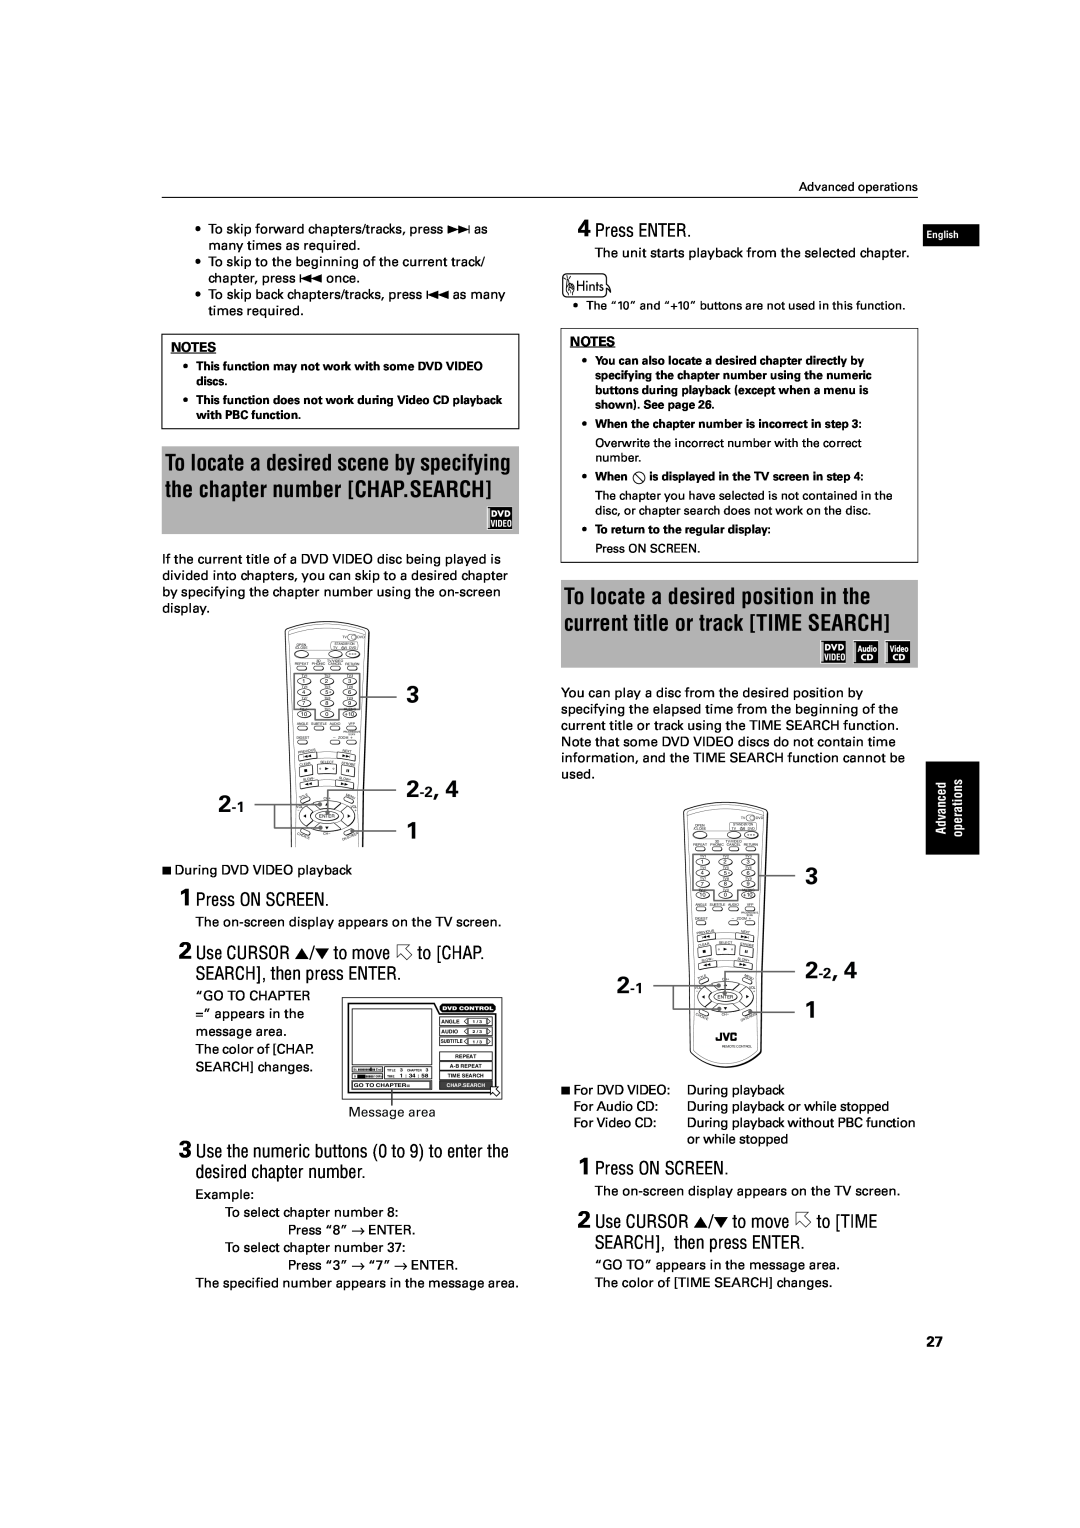 JVC XV-S60 manual 2 -2, Press ON SCREEN, Use the numeric buttons 0 to 9 to enter the desired chapter number, Press ENTER 